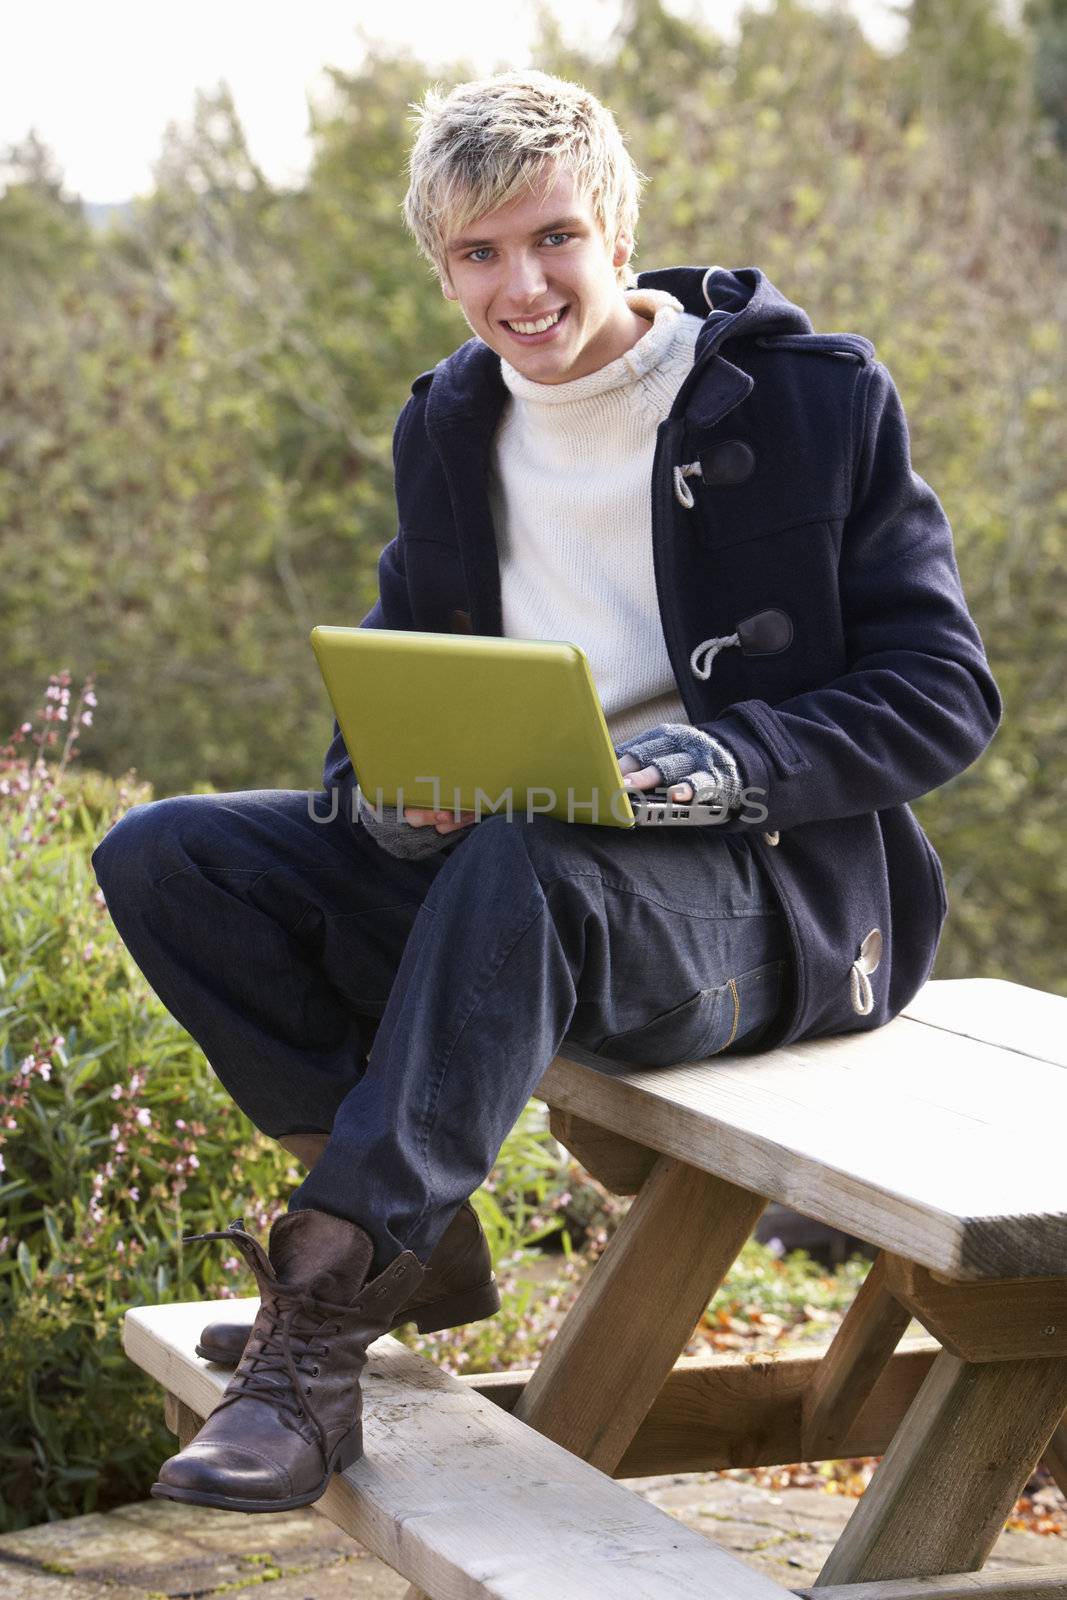 Young man with laptop computer by omg_images